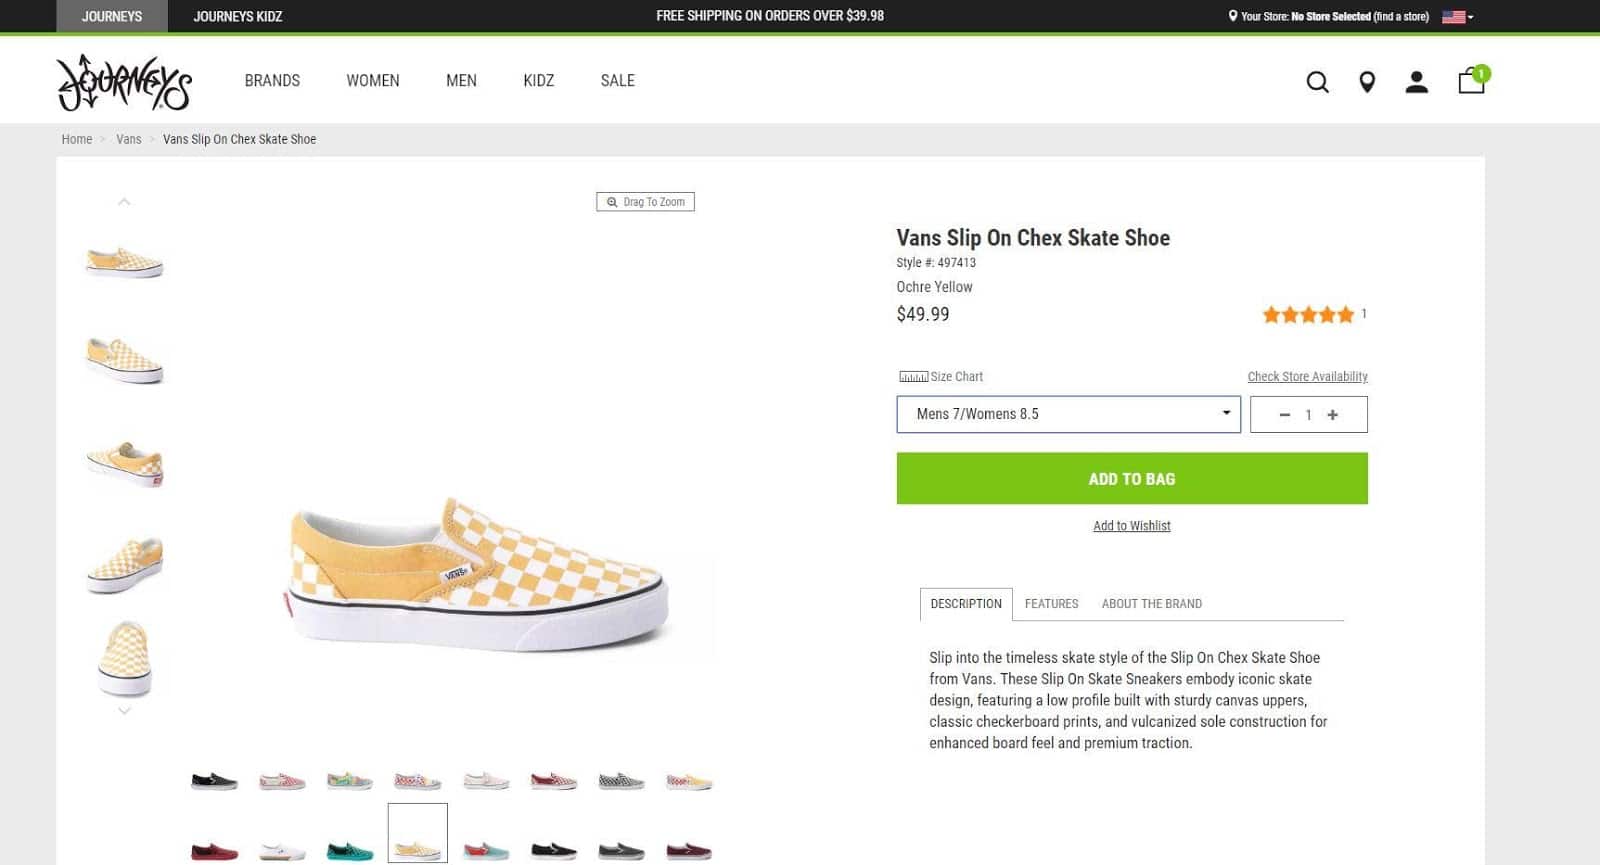 Add to cart button highly visible to boost ecommerce conversion rate